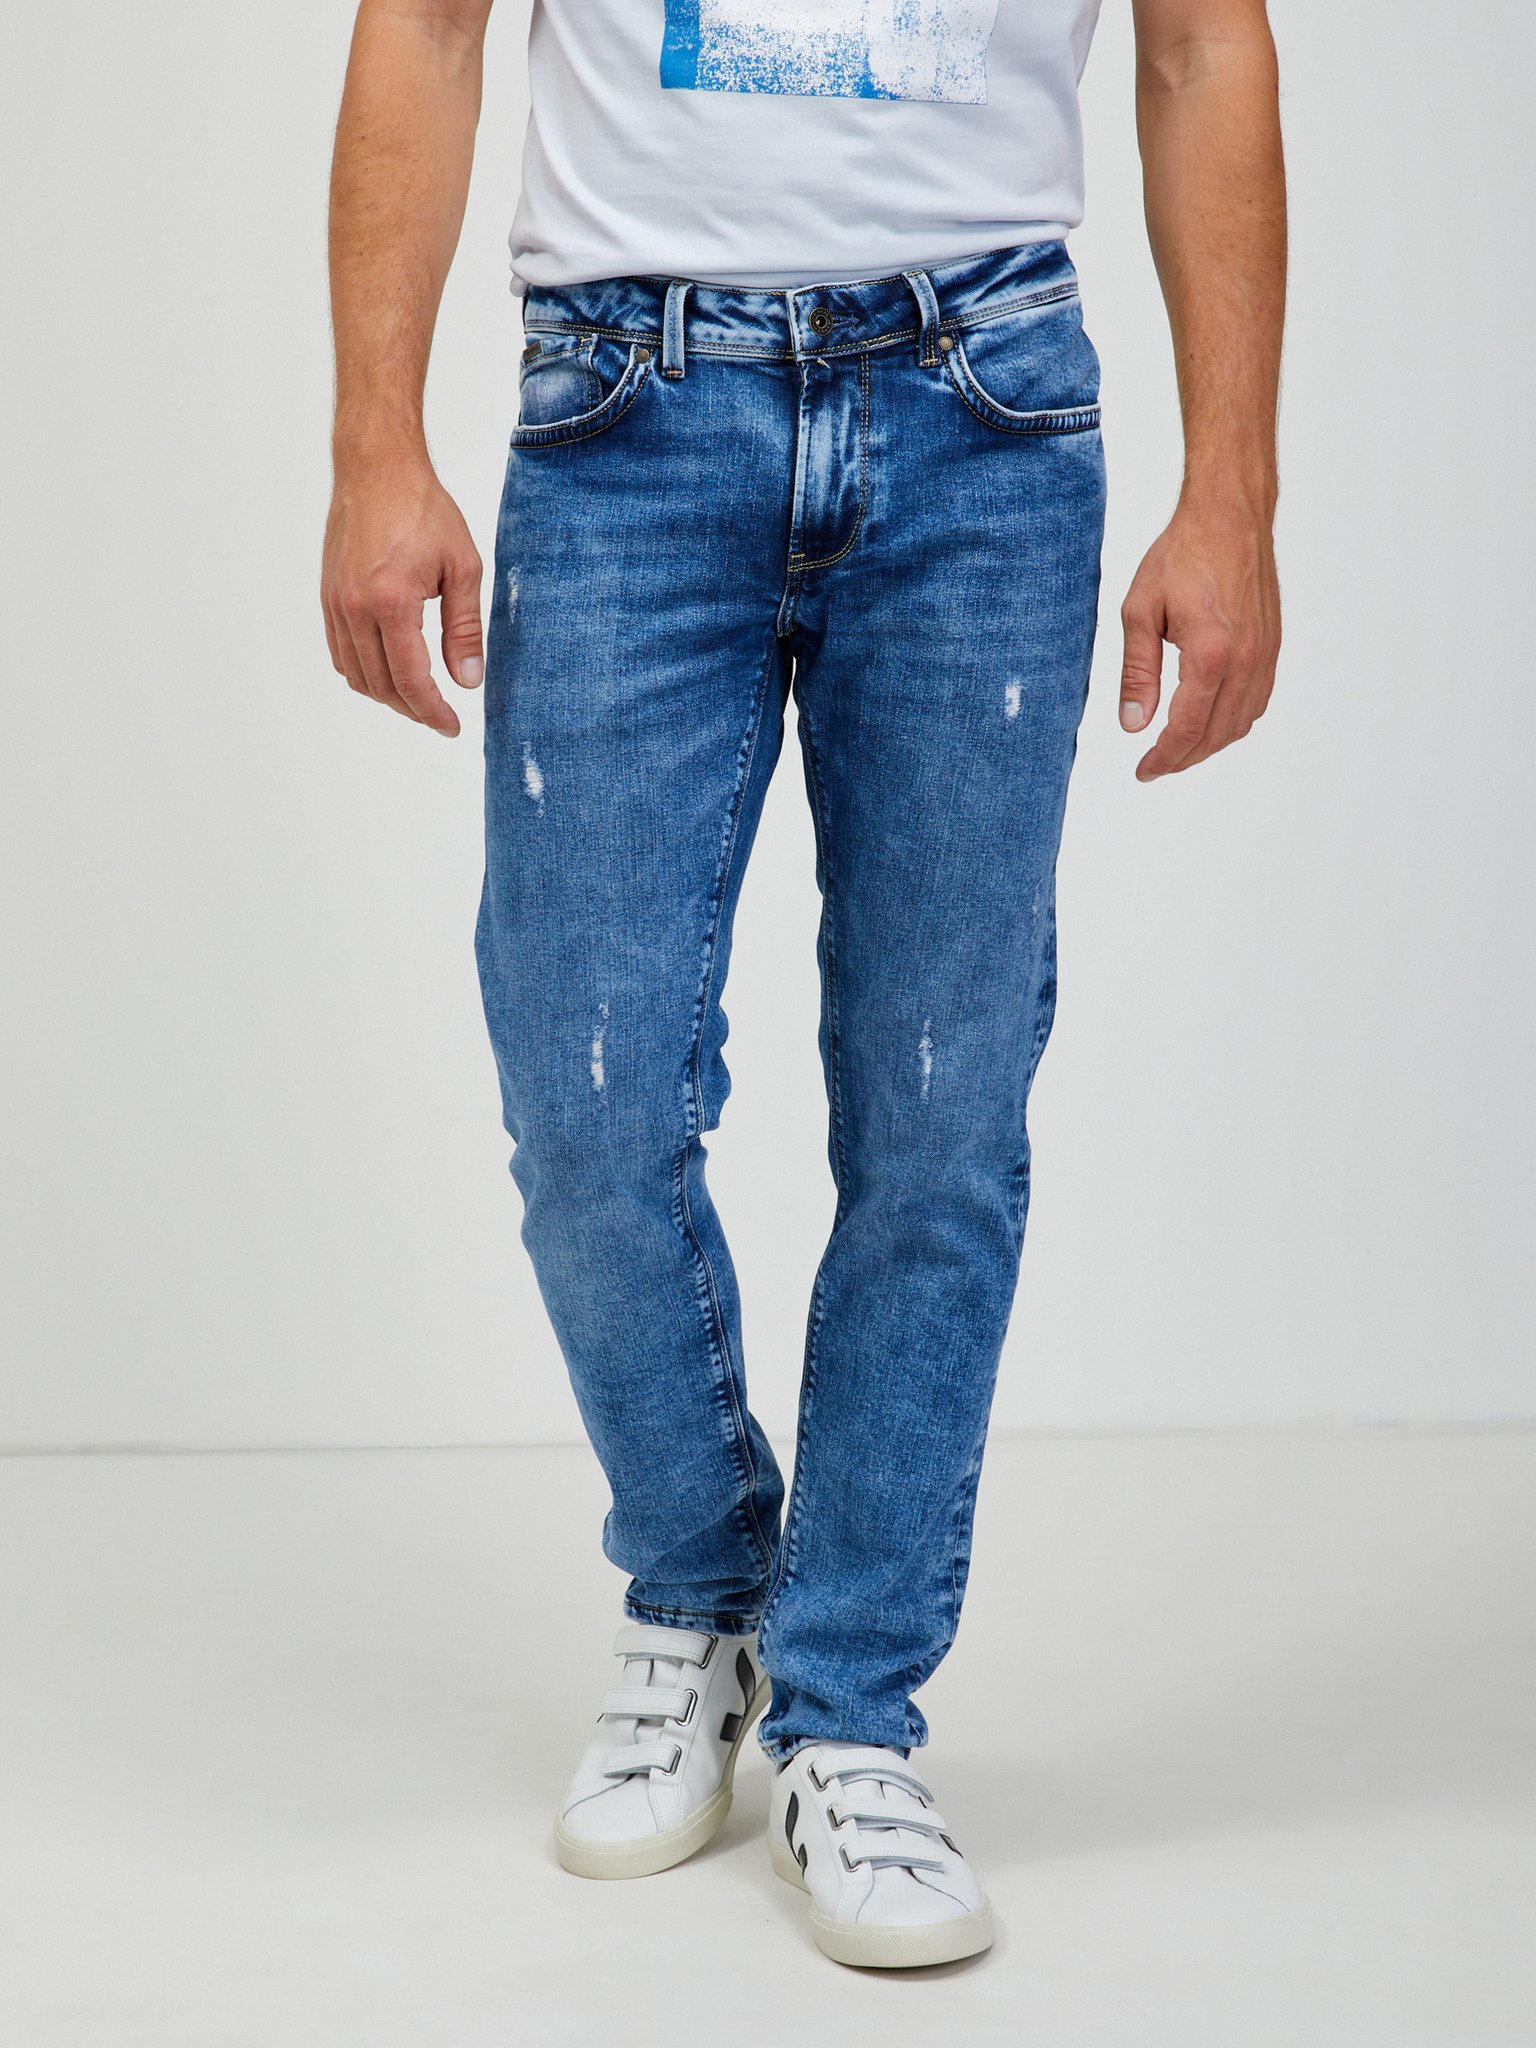 Hatch Pepe Jeans - Jeans